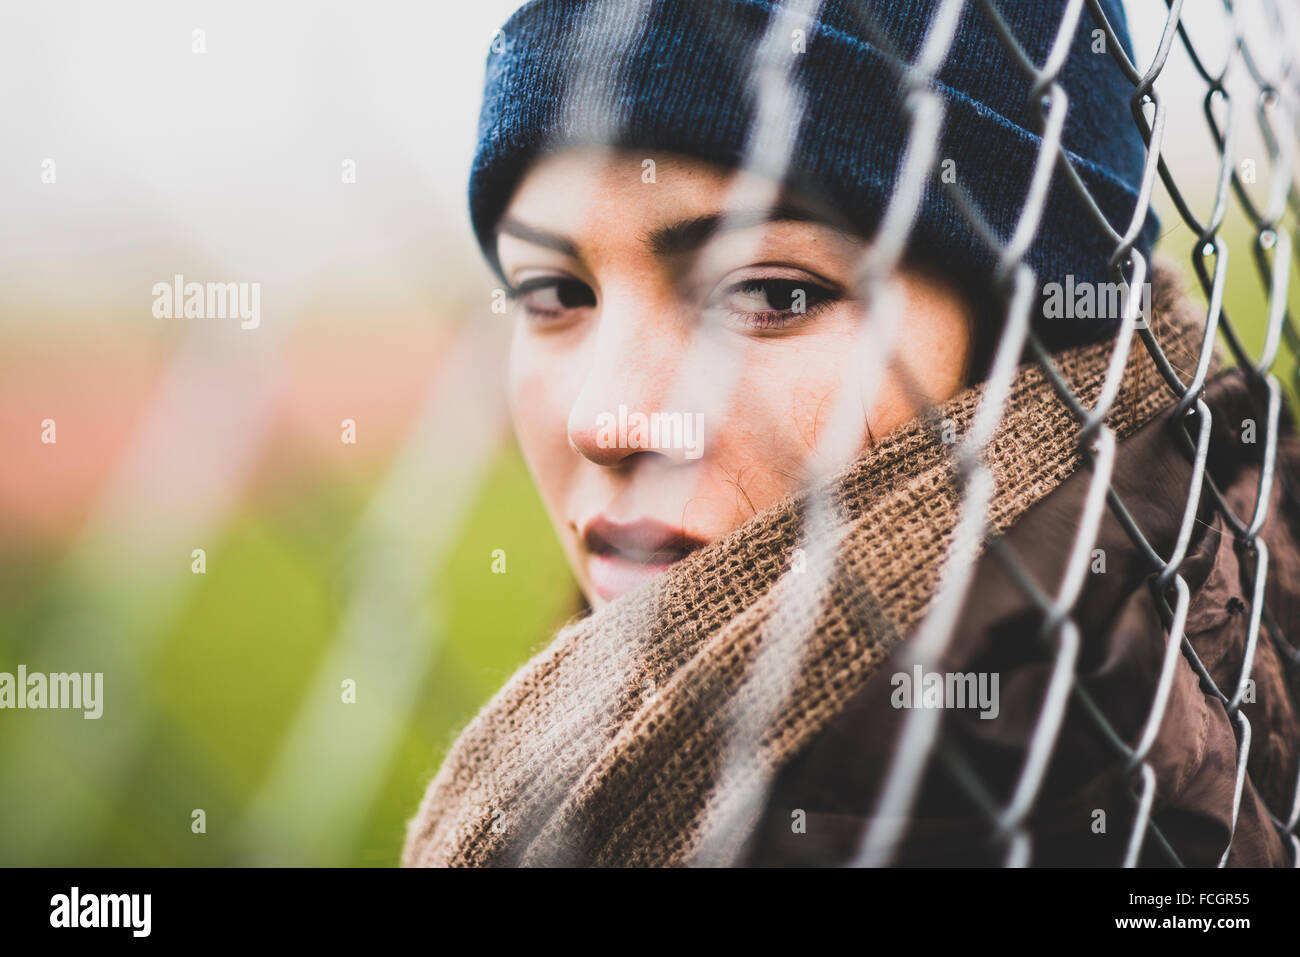 Portrait of young woman looking through wire mesh Stock Photo